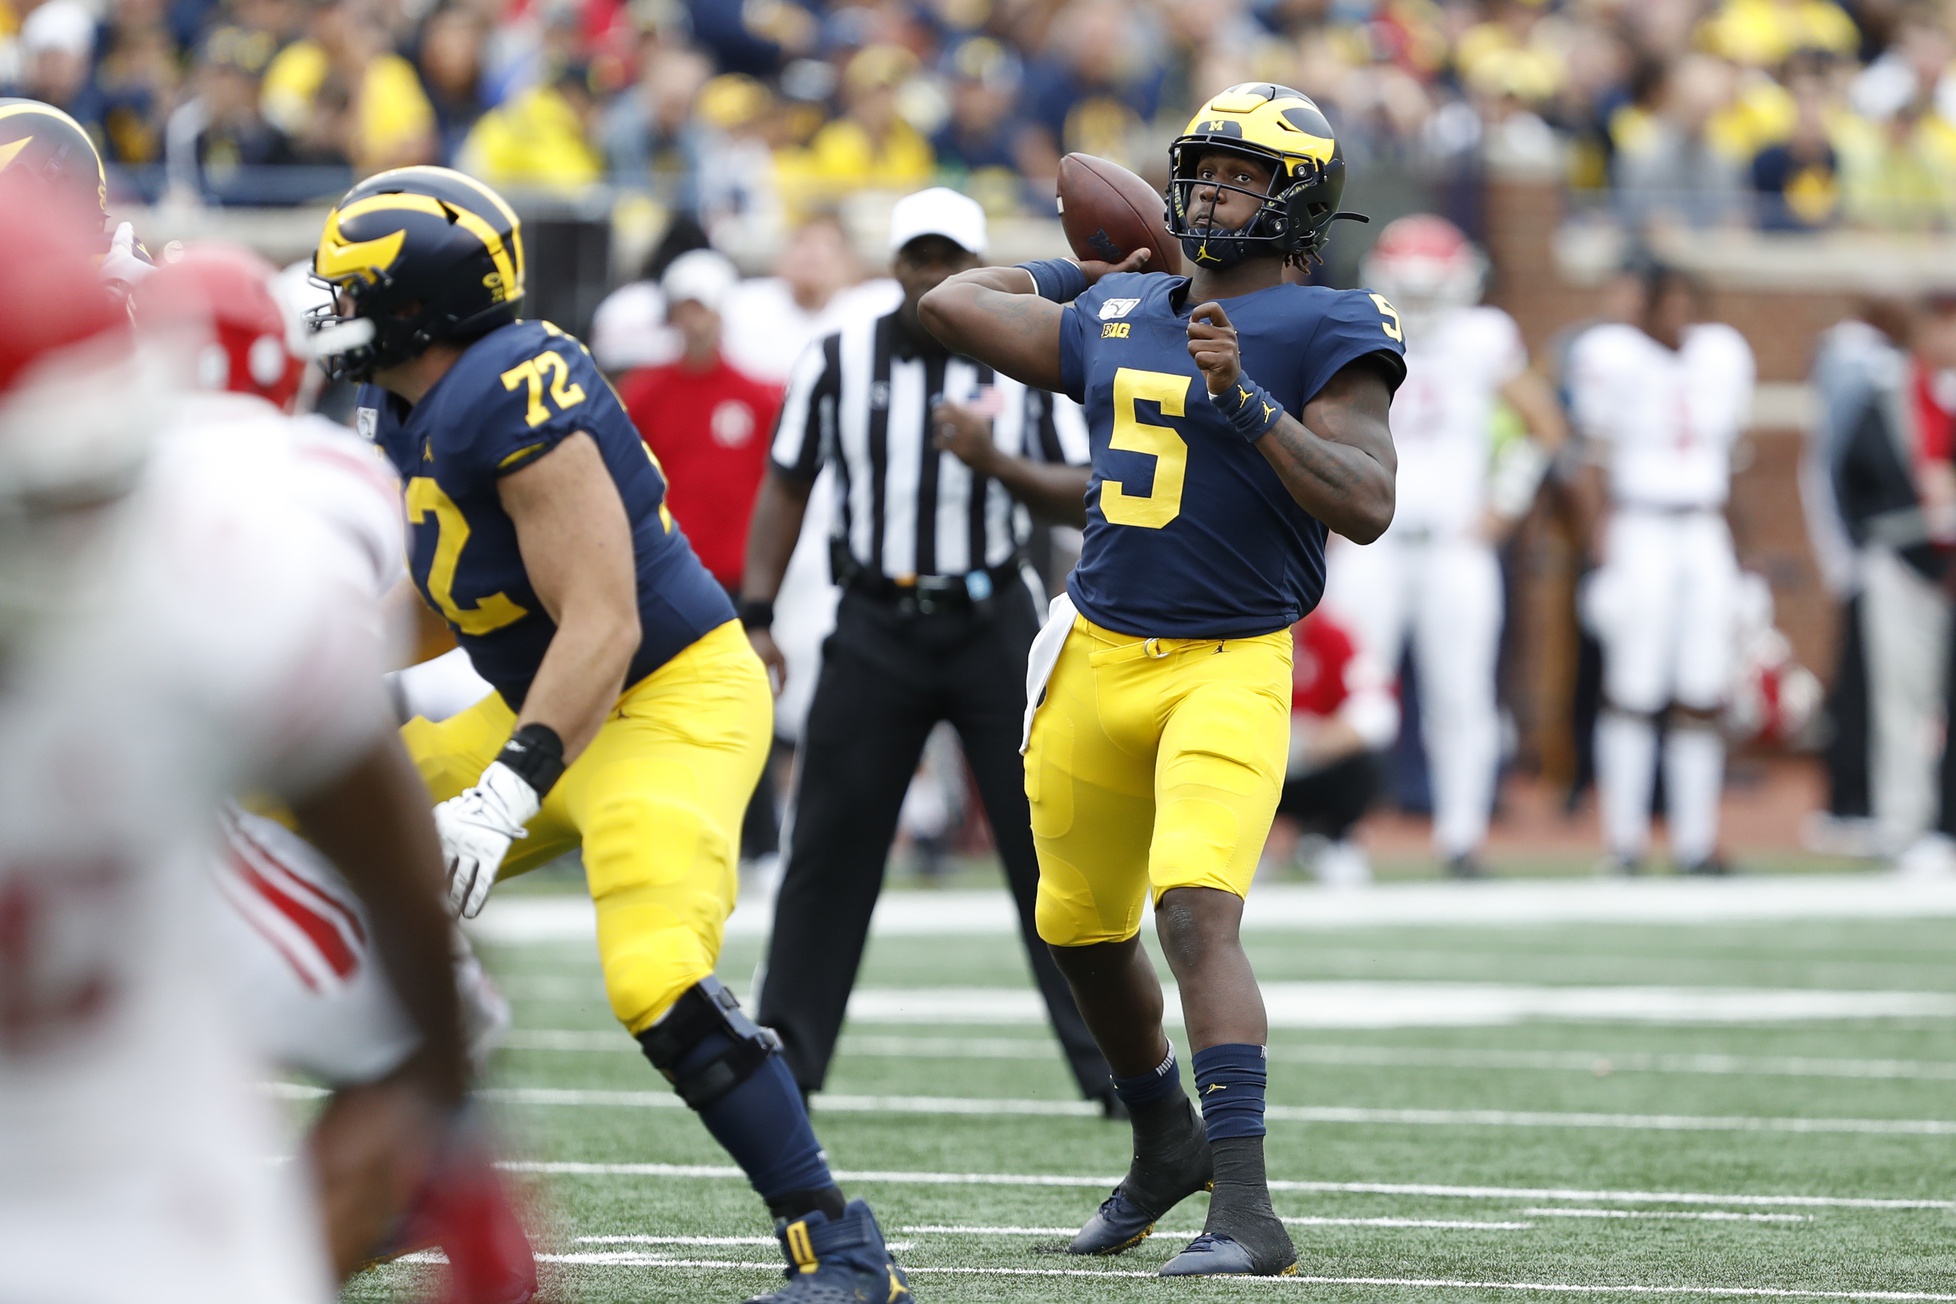 Michigan Football Chatter What Needs To Happen To Get Over Osu Hump